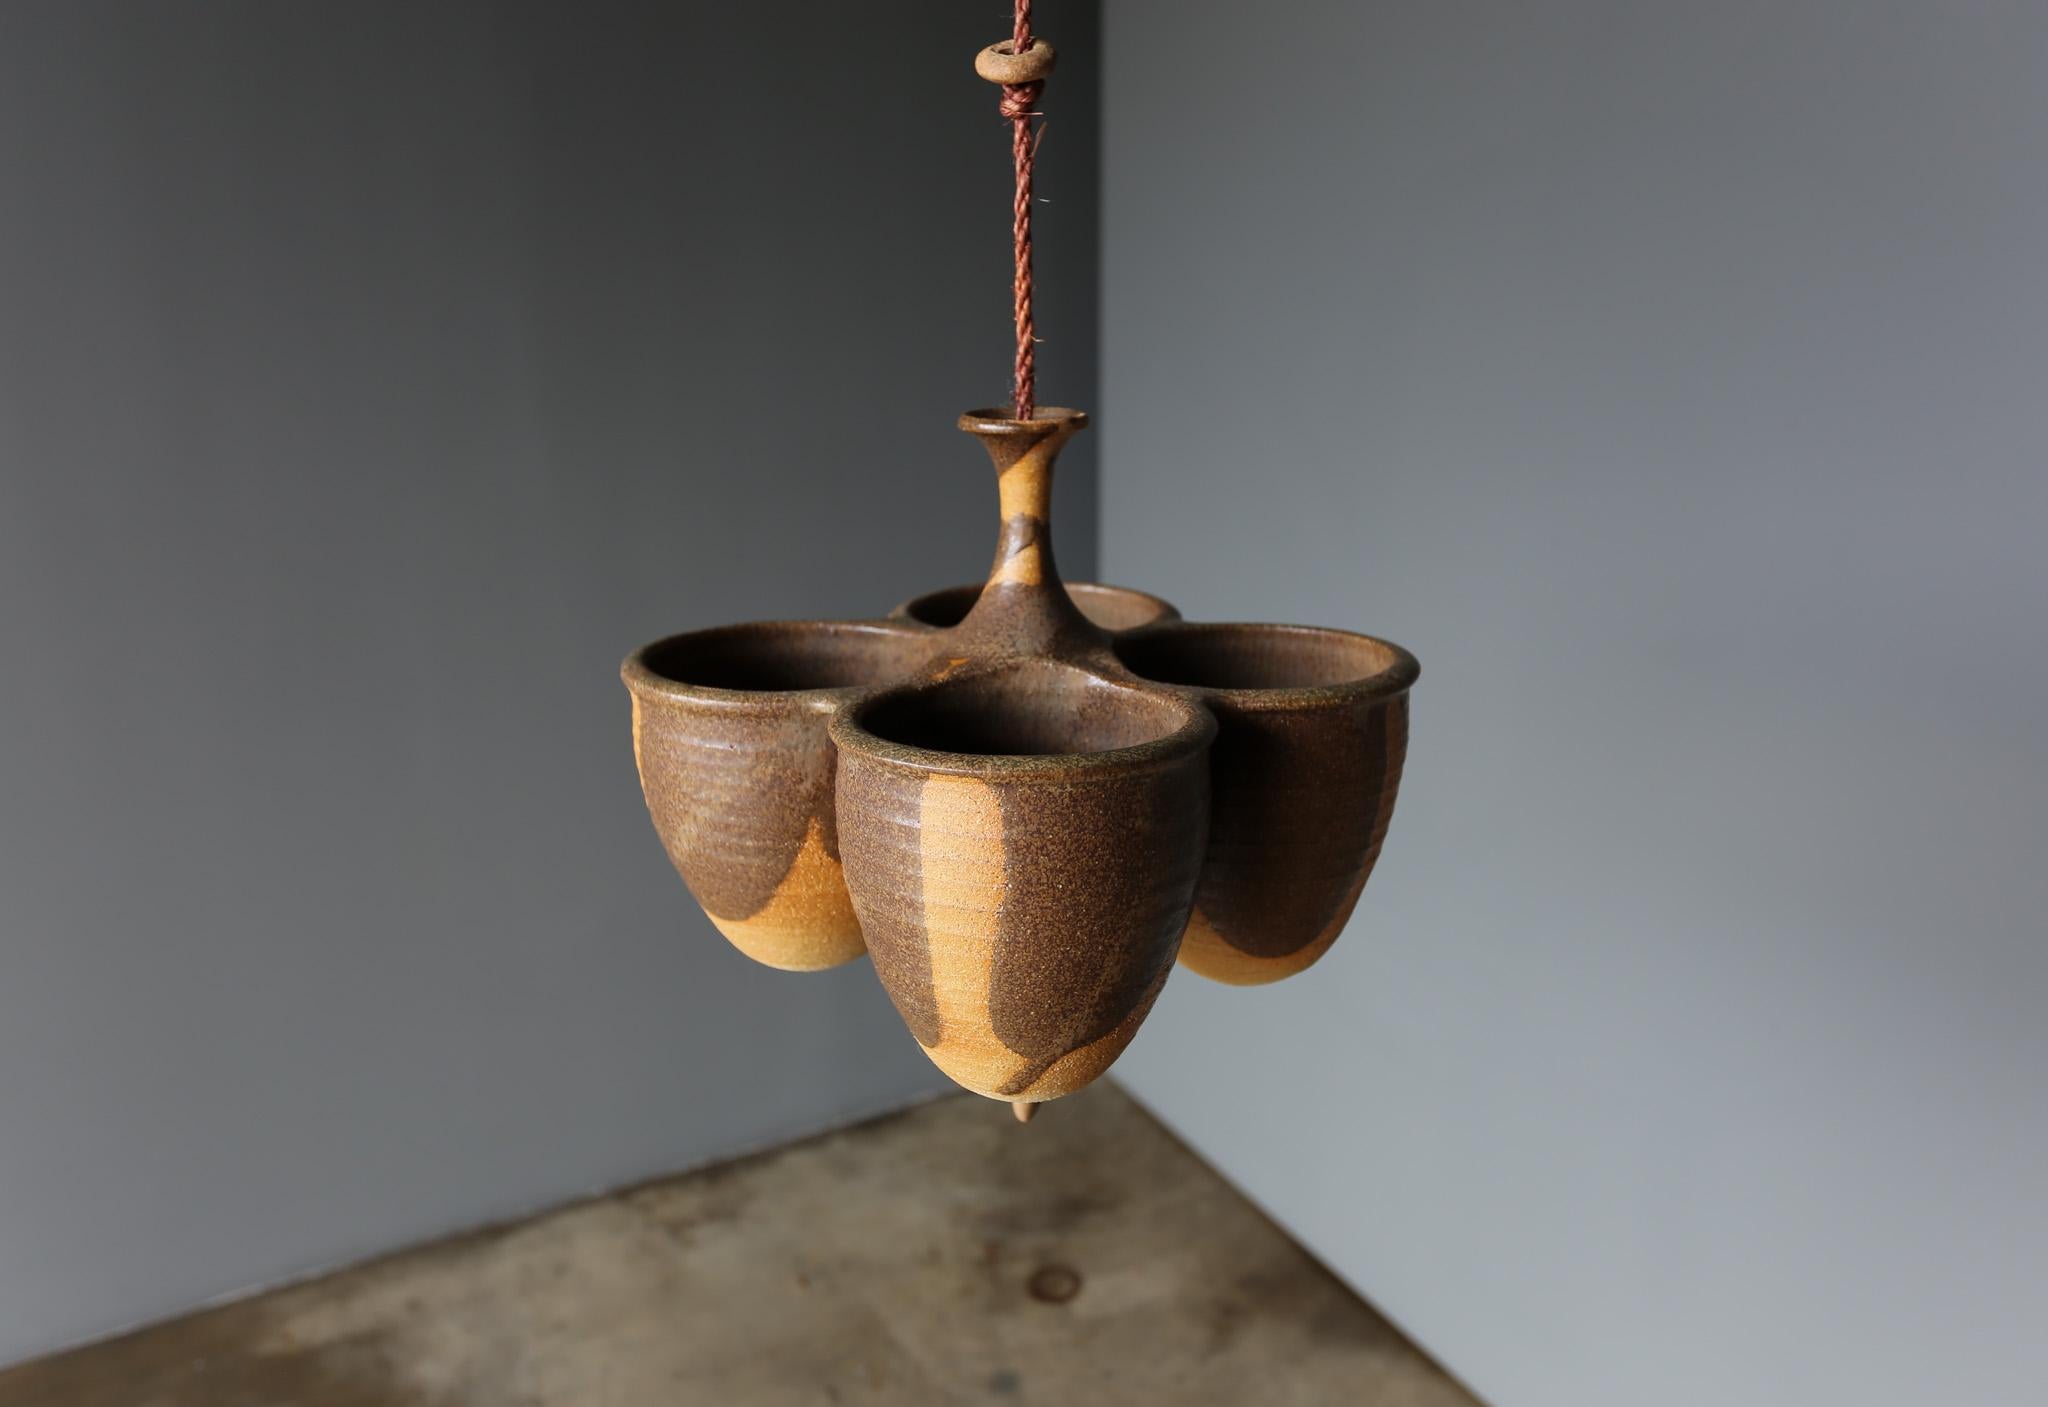 Wishon-Harrell Ceramic Hanging Planter, California, 1970's.  This piece is signed to the bottom.  